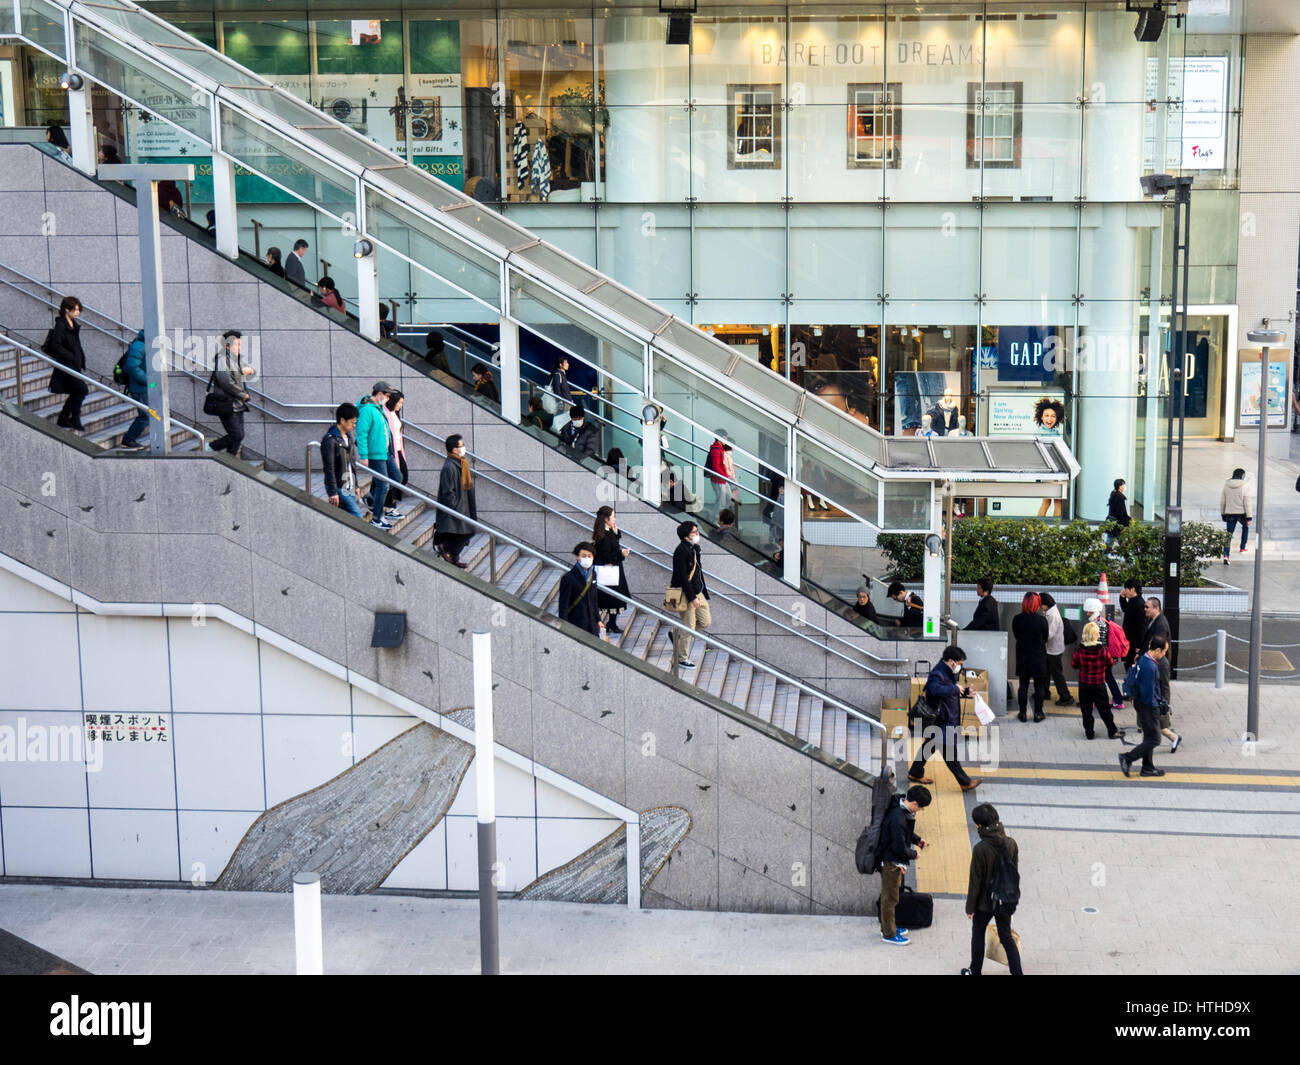 Shoppers and commuters exiting and entering Shinjuku Train Station and department stores, Tokyo, Japan. Stock Photo